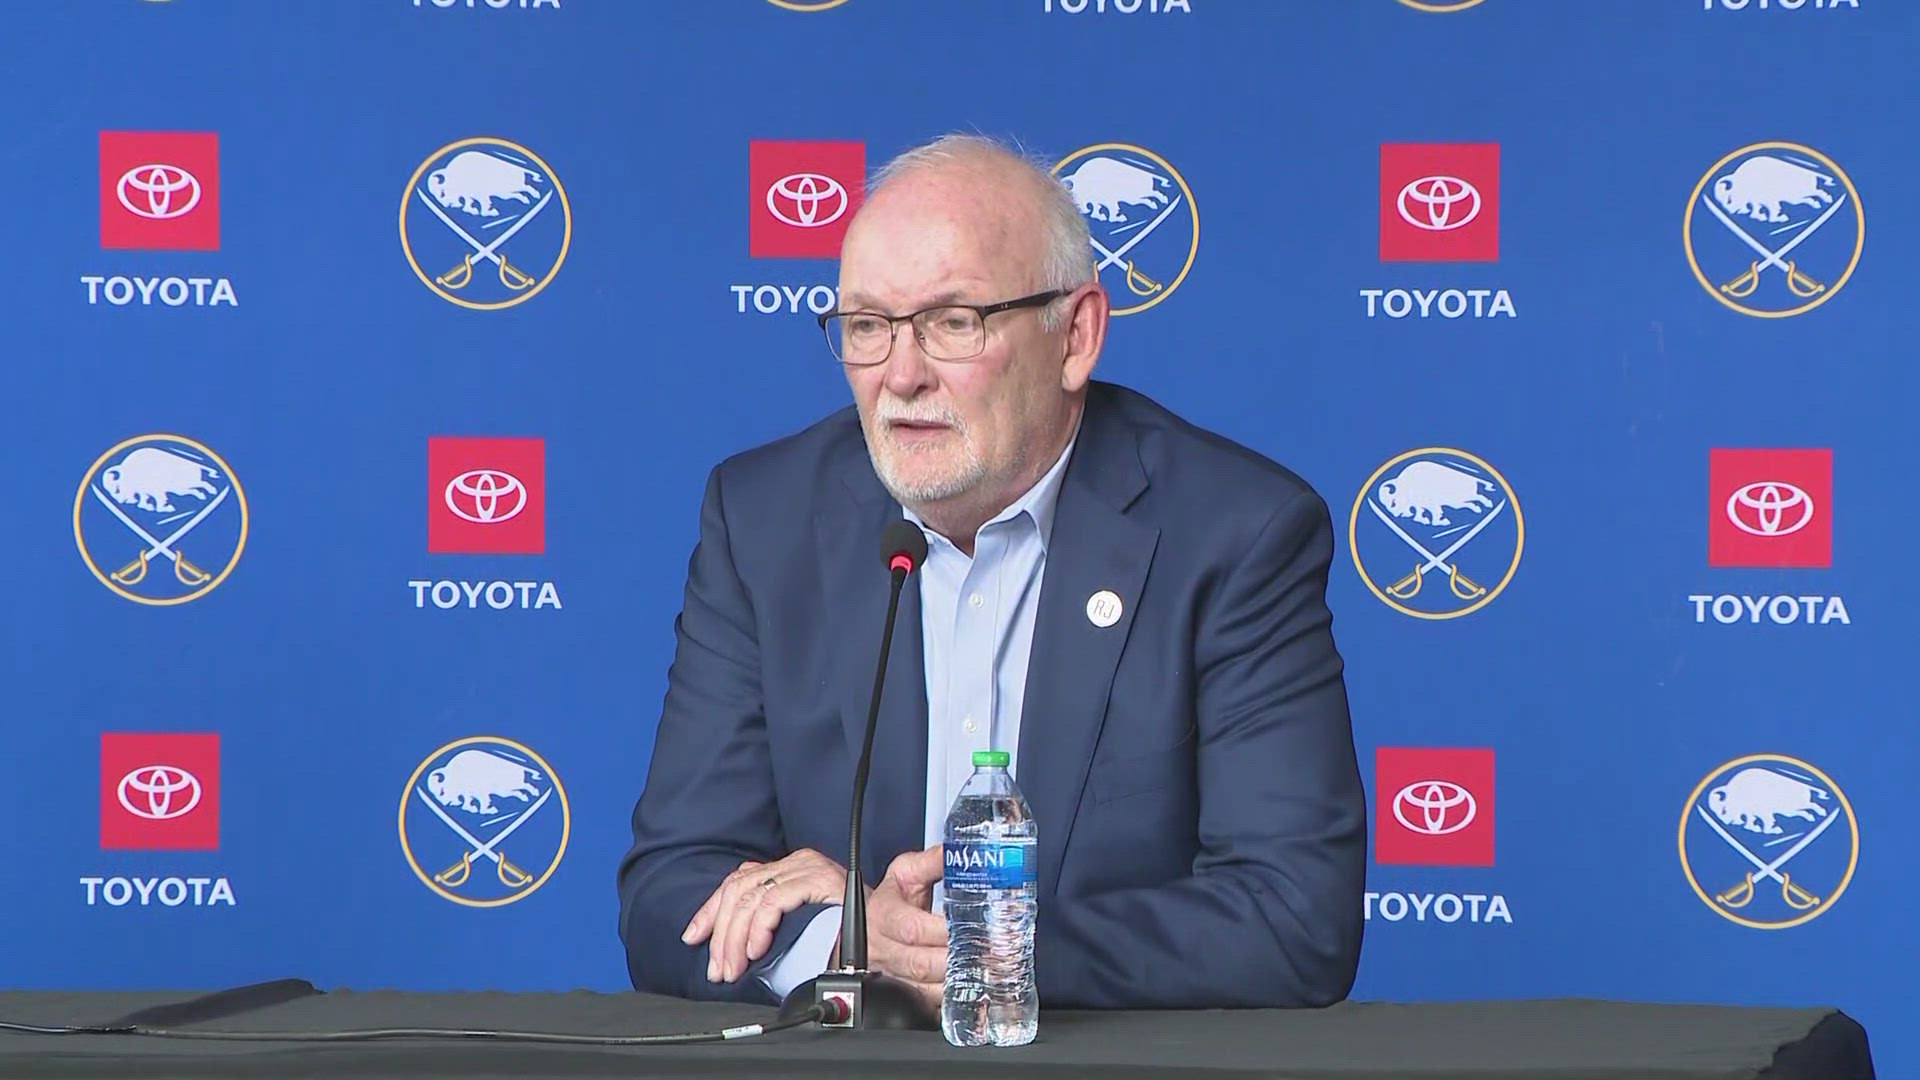 Buffalo Sabres owner Terry Pegula welcomed back Lindy Ruff as the 'new' head coach of the team.